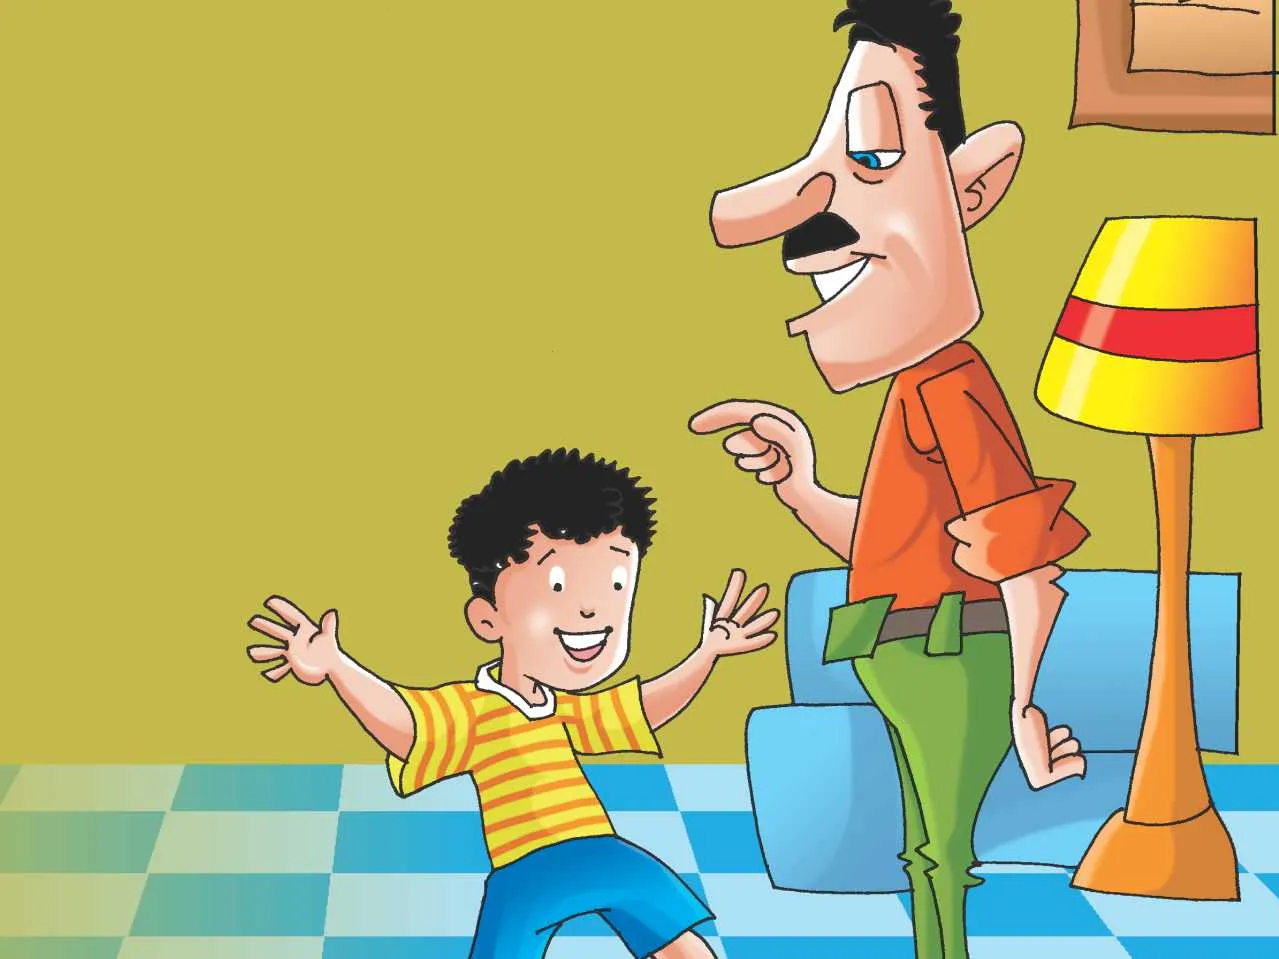 Father and son cartoon image